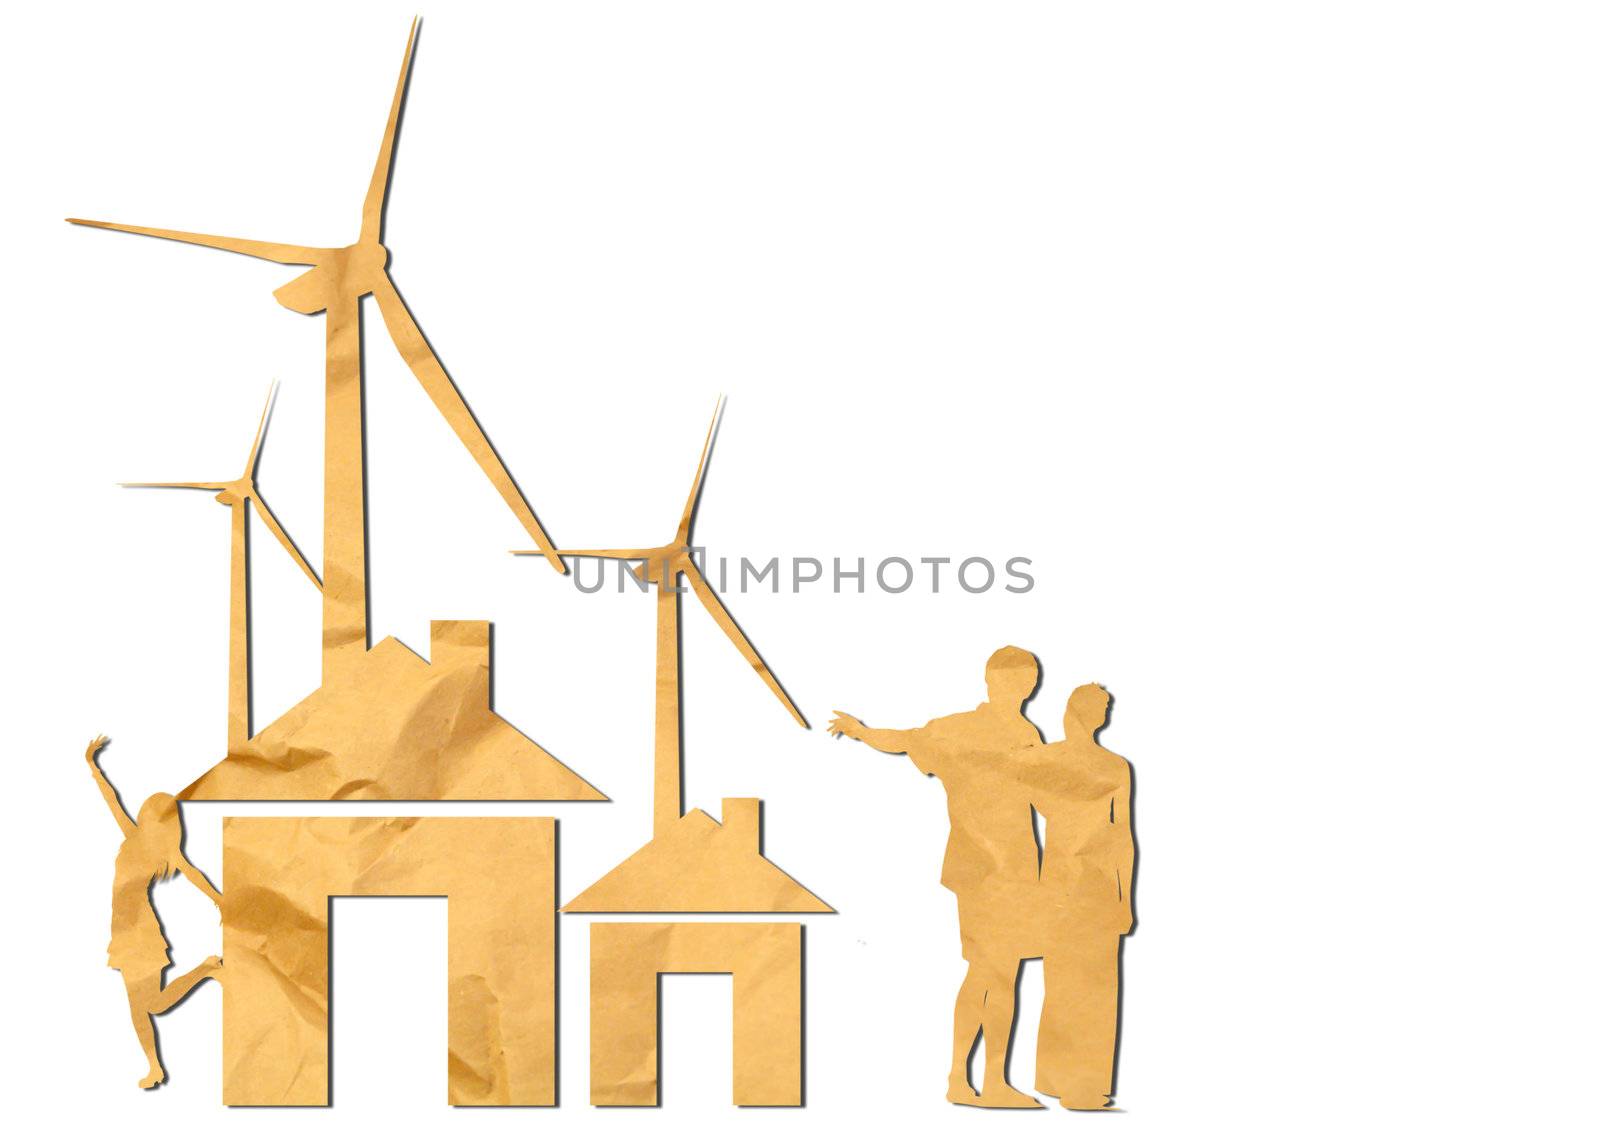 Wind power station recycled paper